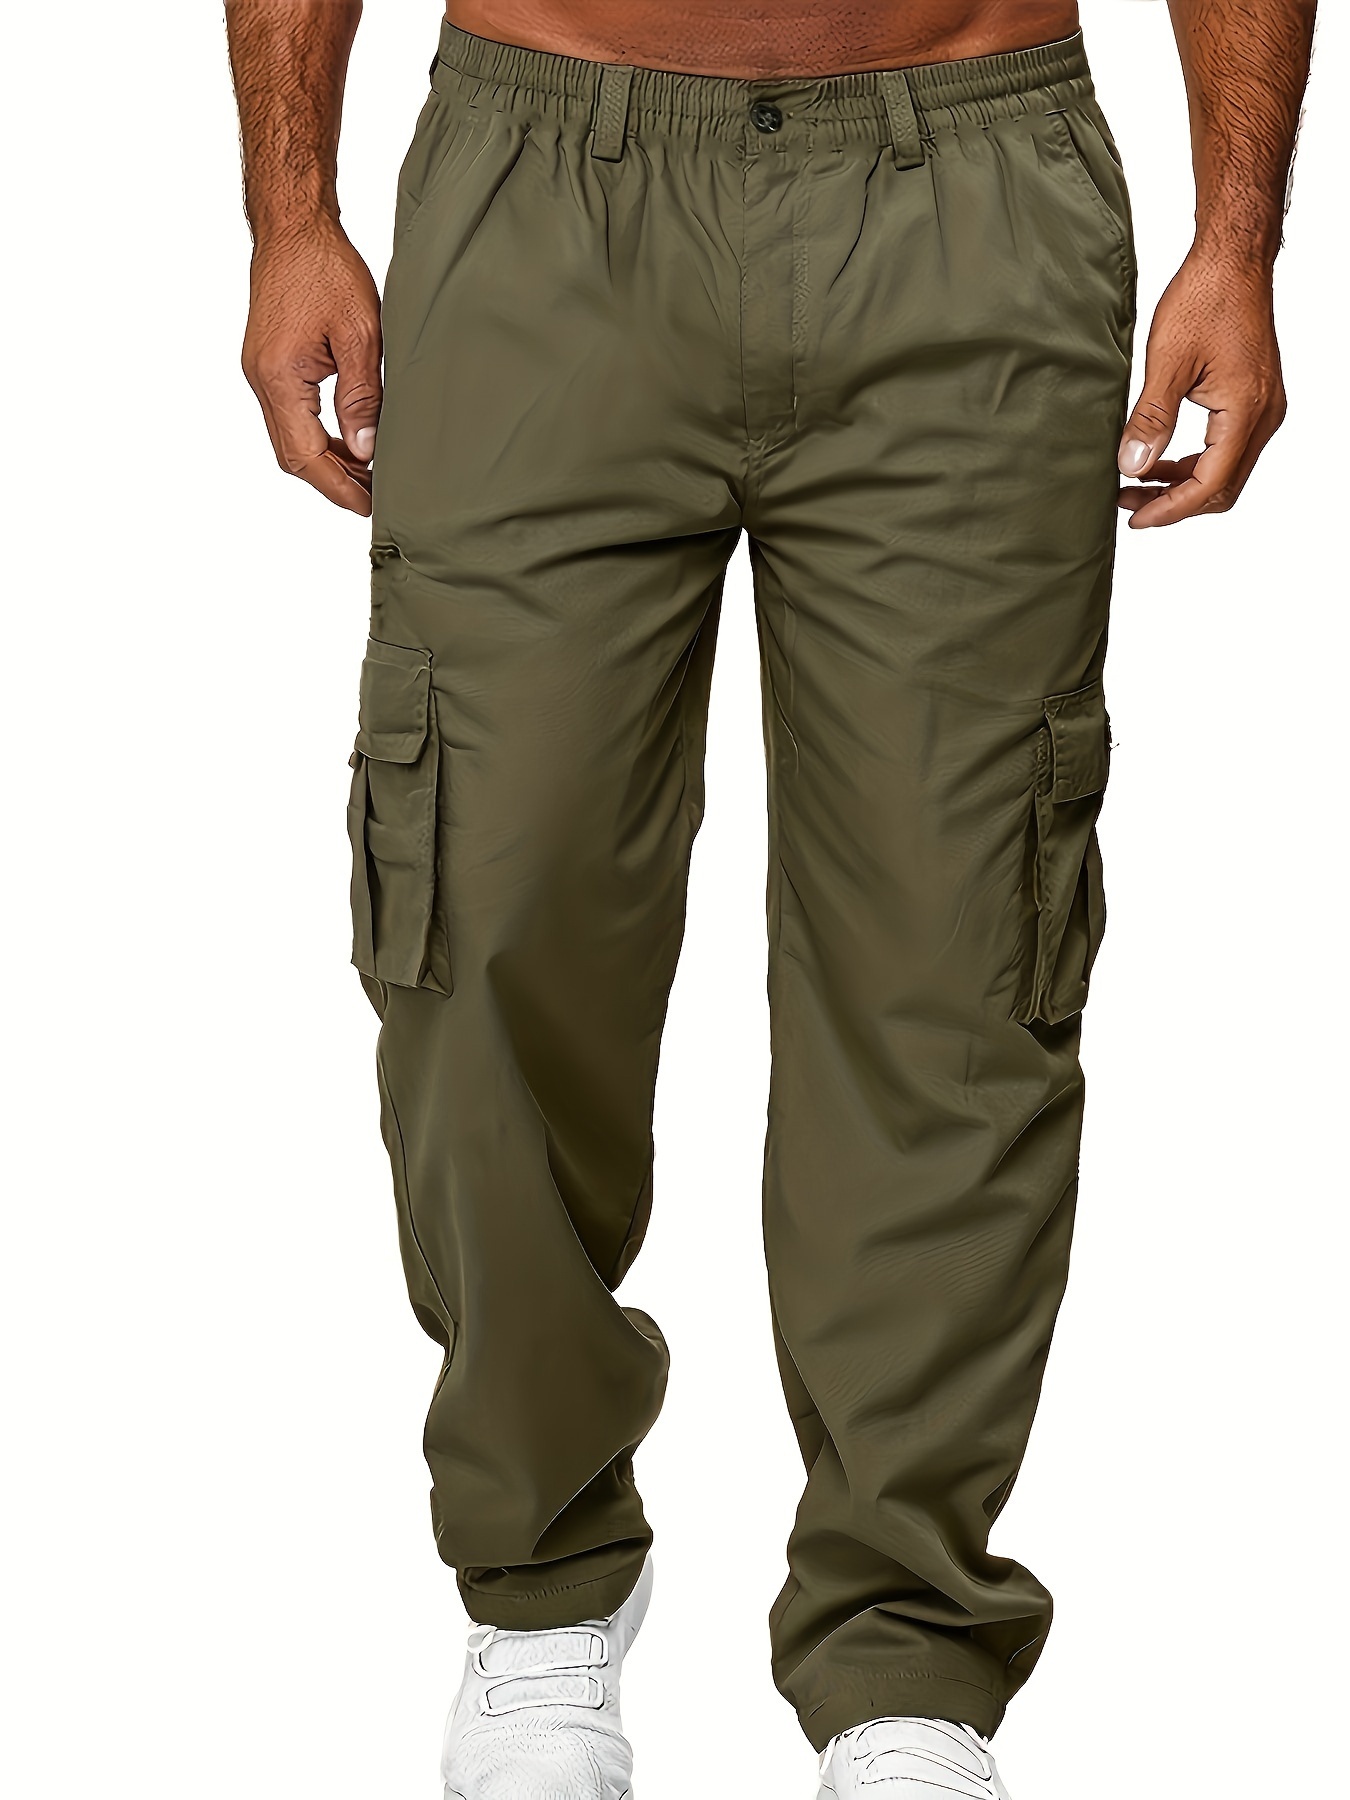 Womens Cargo Pants Stretch Casual Chino Combat Trousers Multi